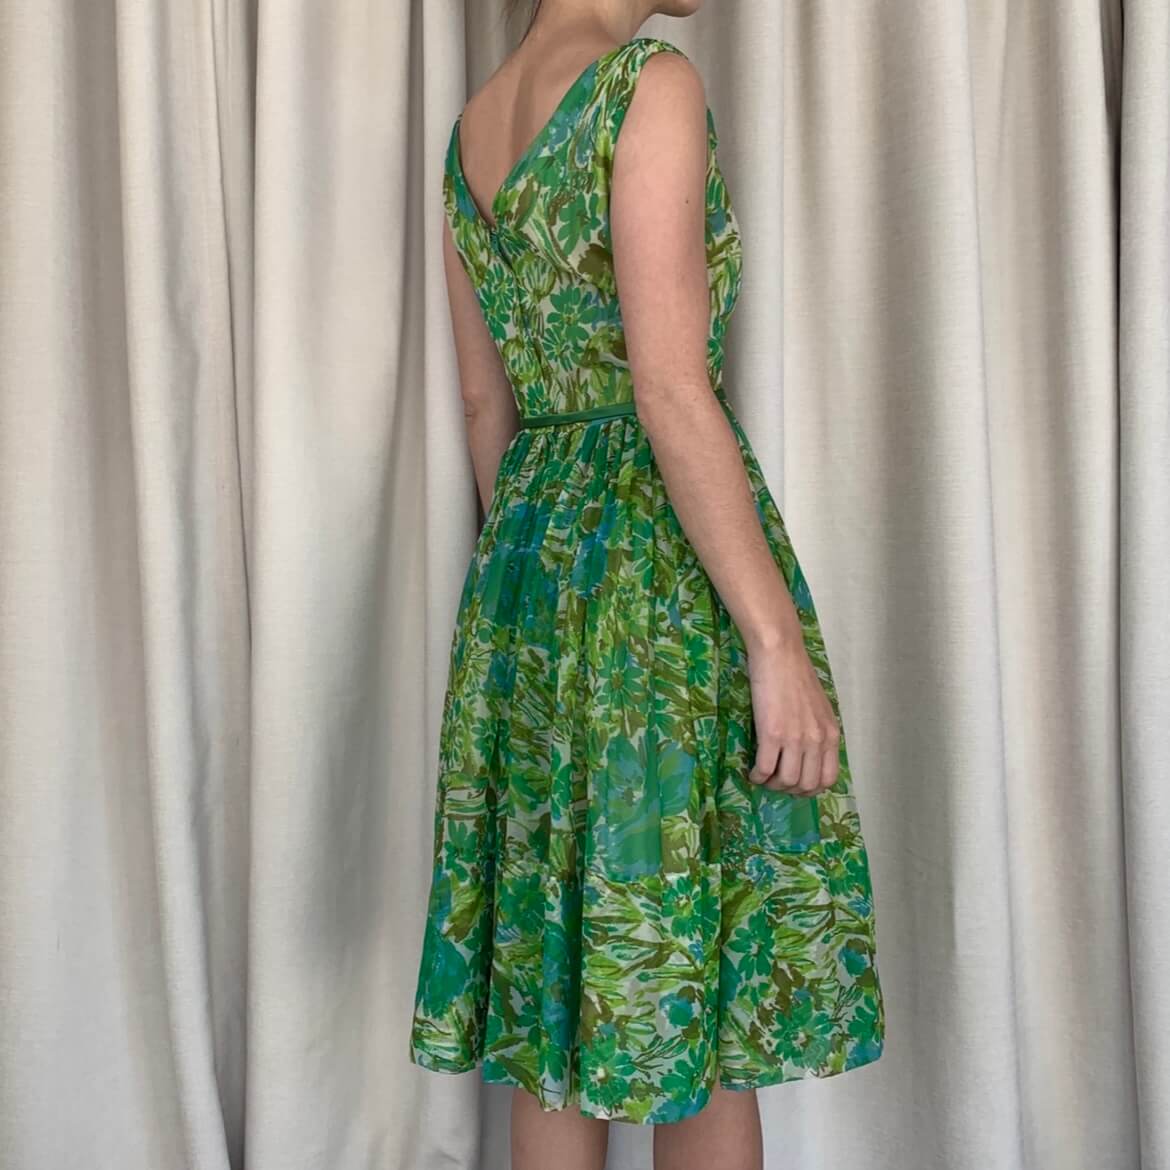 The same green 50s dress view from the side